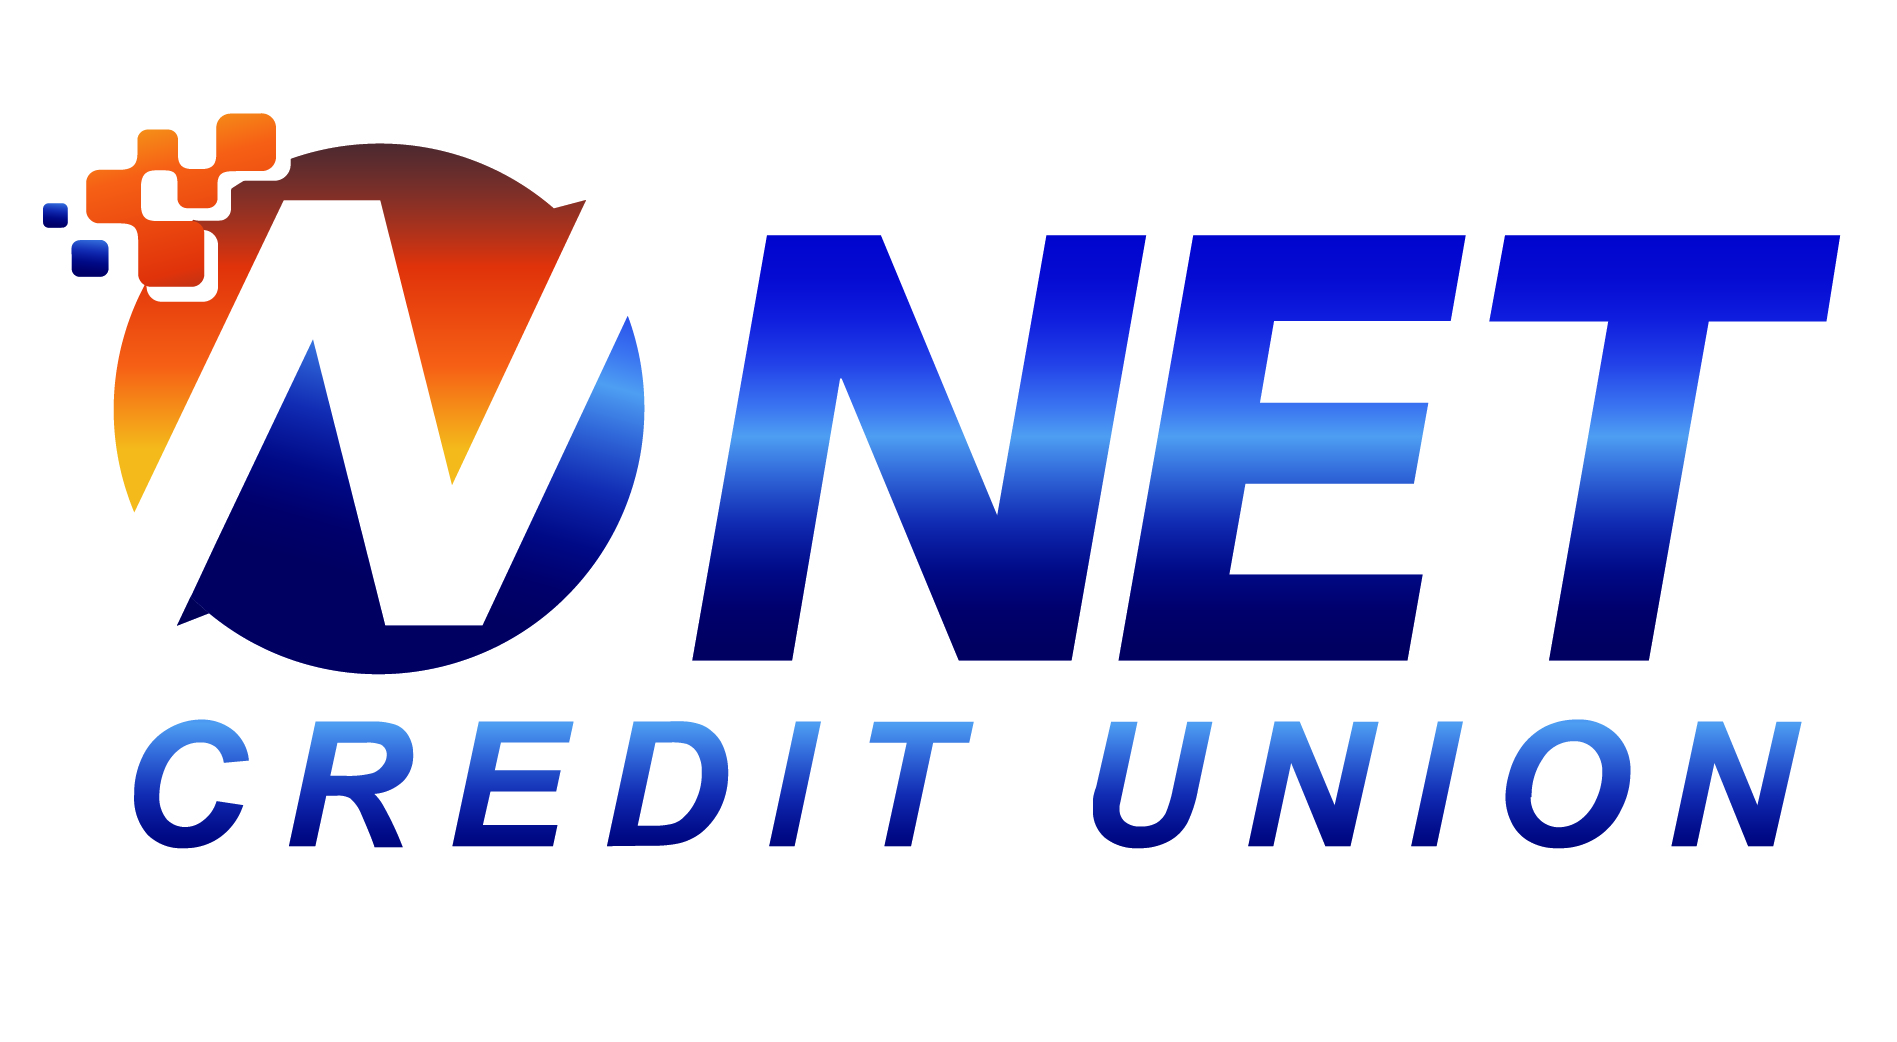 NET Credit Union - You don't need a bank, Bank on NET!